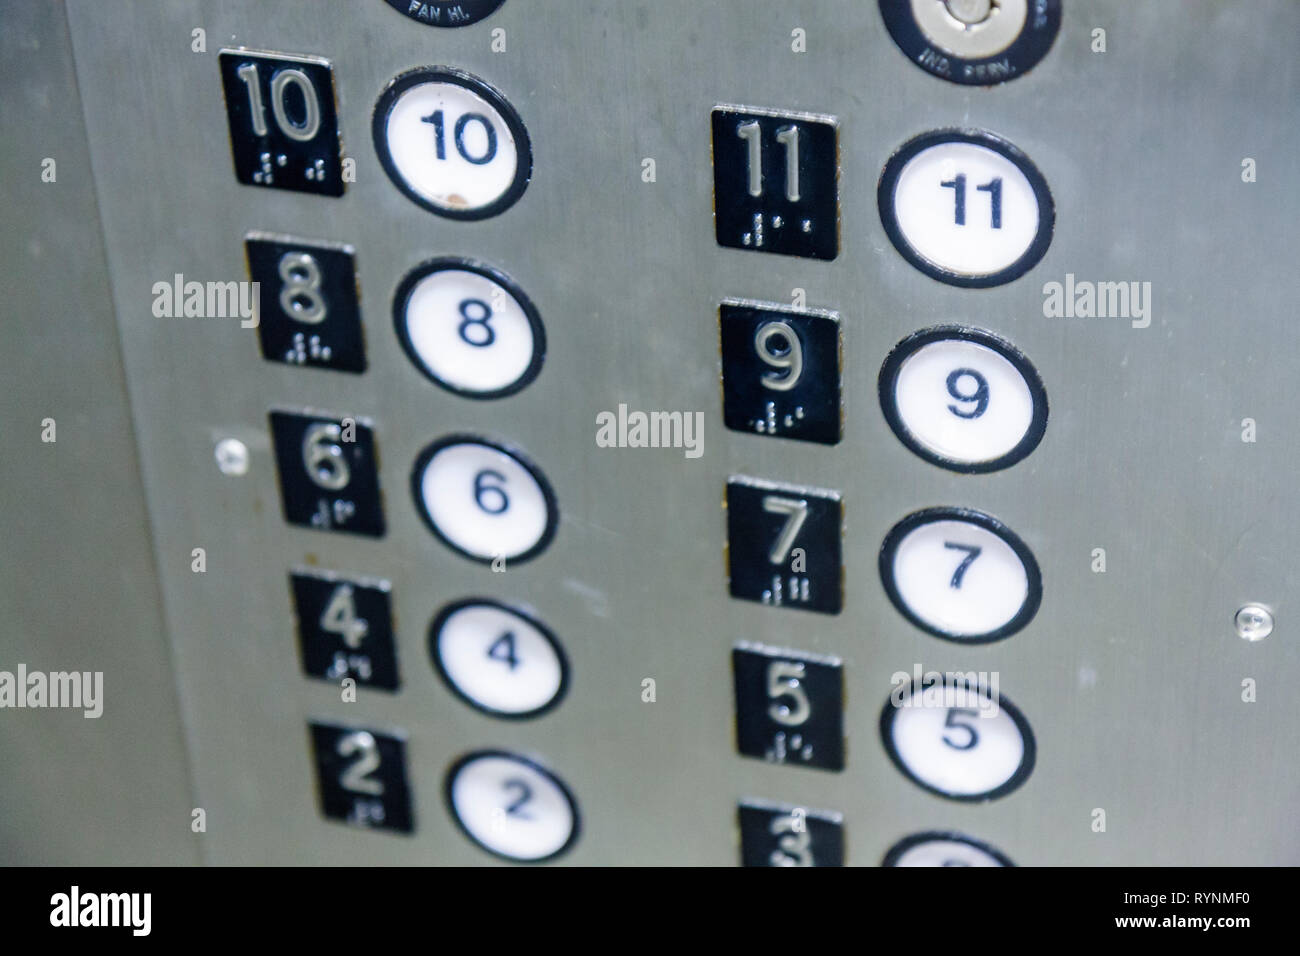 Miami Beach Florida,elevator,lift,buttons,metal,Braille,numbers,floors,ten,eleven,eight,nine,seven,six,five,four,two,round,rectangle,FL090213160 Stock Photo